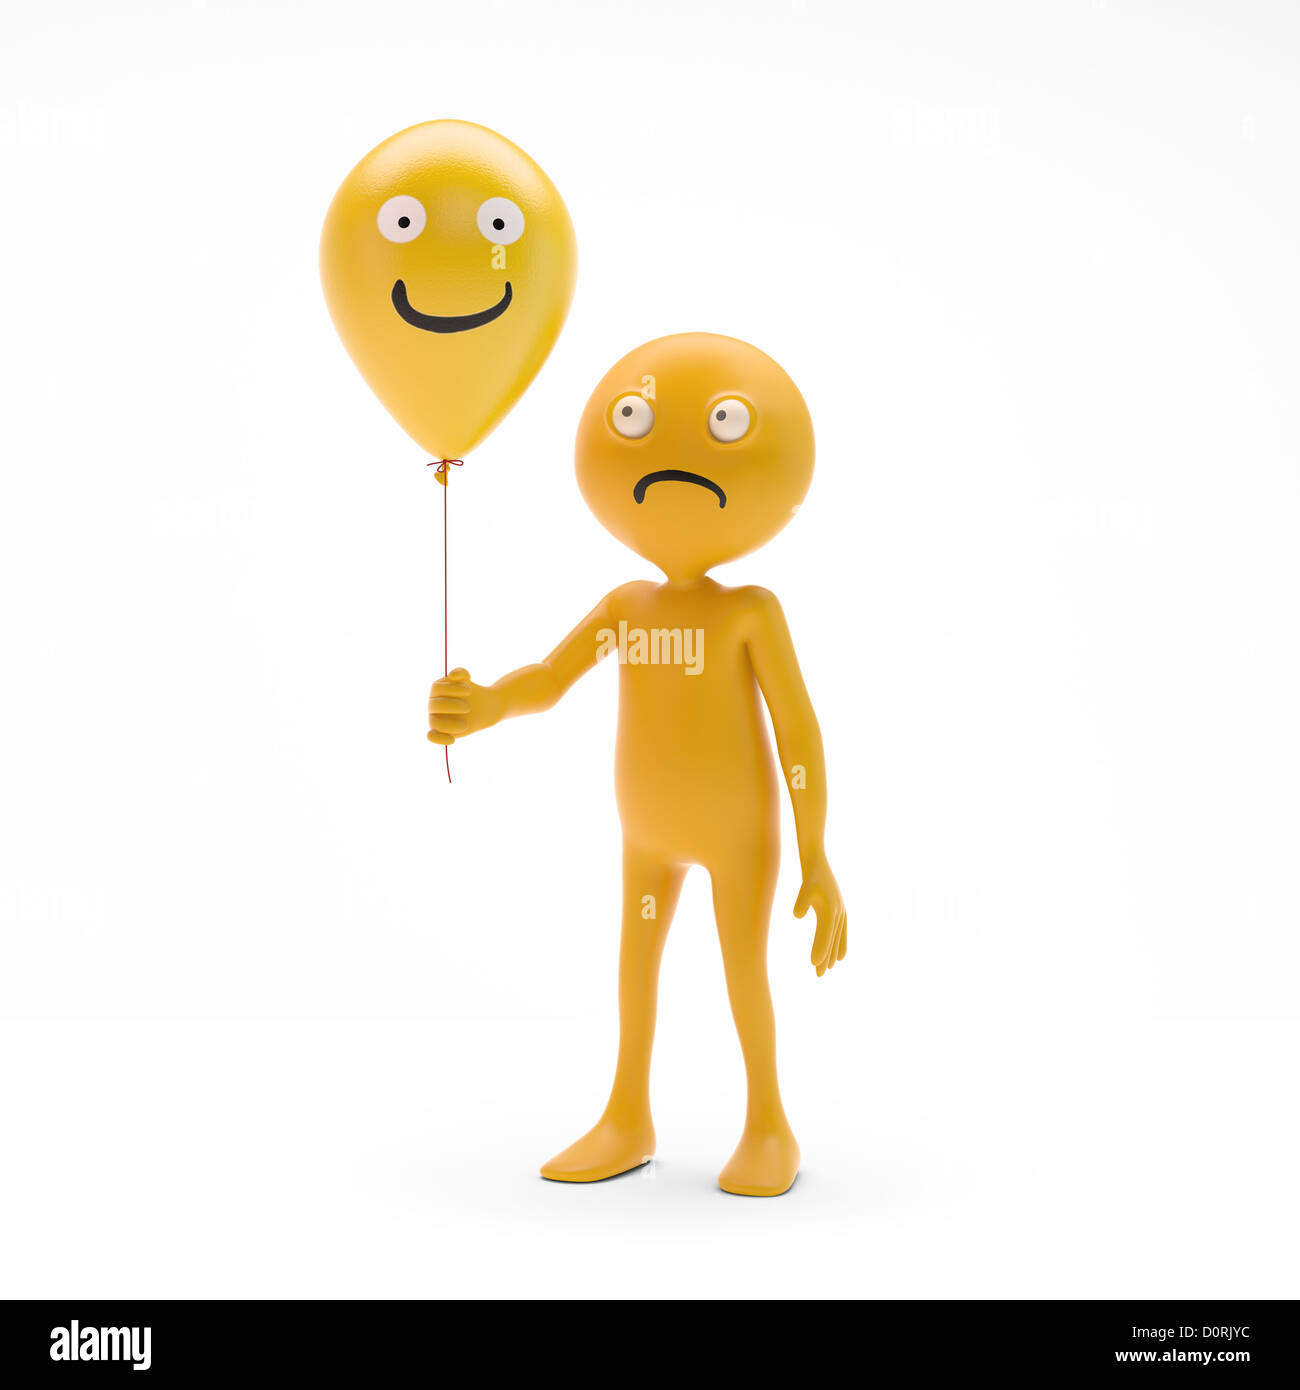 Character smiley holding balloons Stock Photo